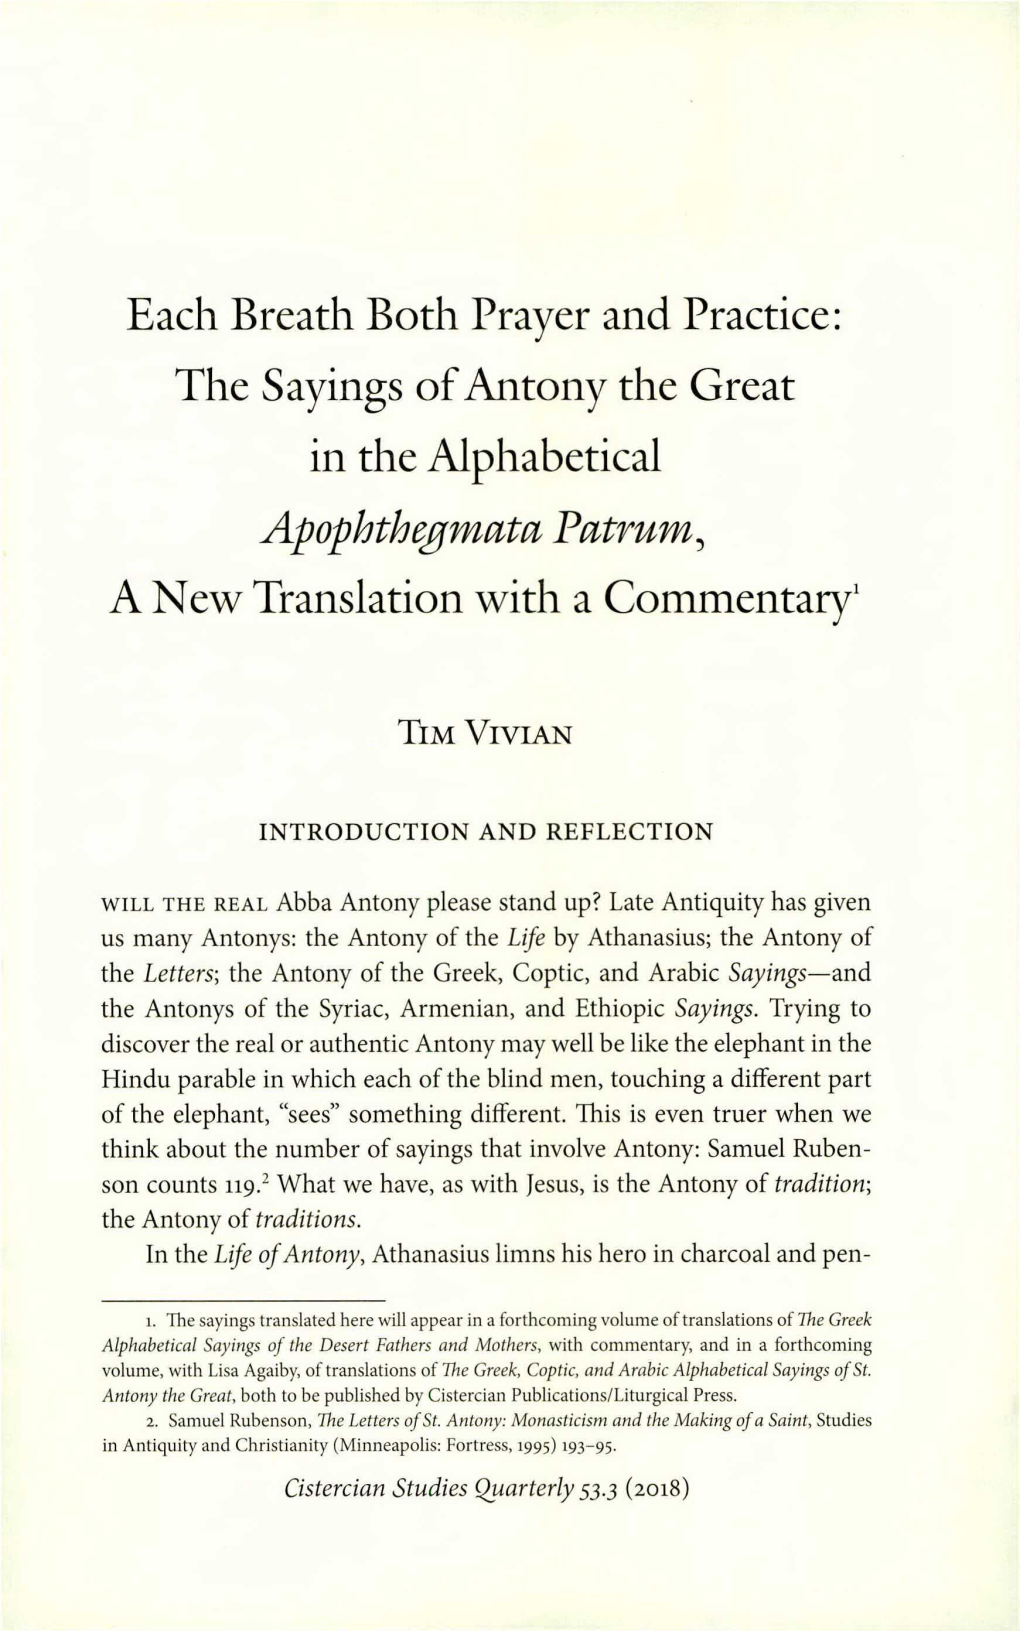 The Sayings of Antony the Great in the Alphabetical Apophthegmata